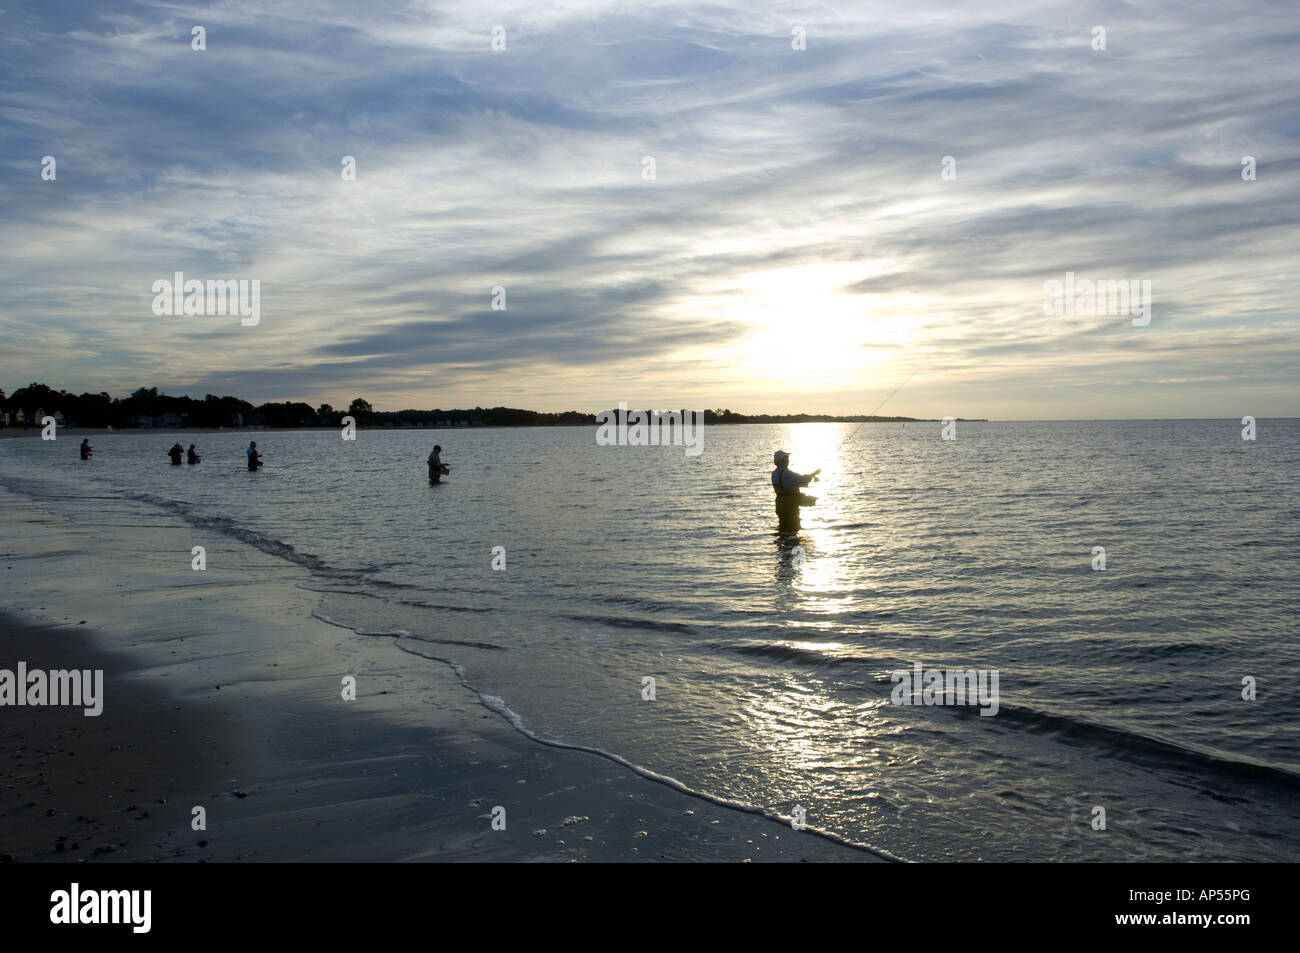 Group of fisherman in casting class, wading in water and casting at sunrise, Compo Beach, Westport, Ct. Connecticut. Stock Photo